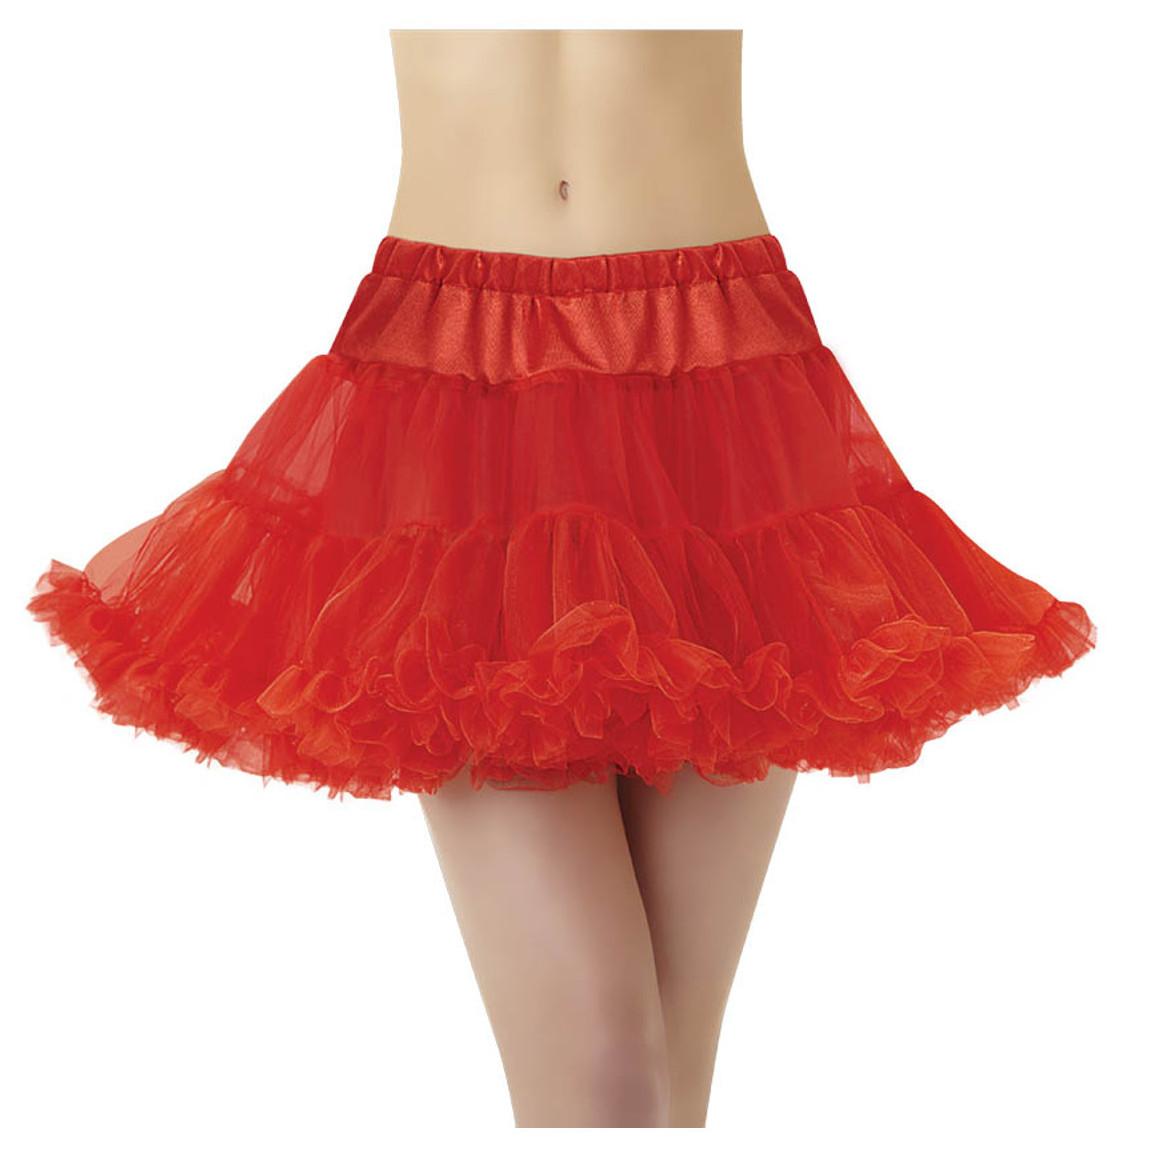 Adult Standard Full Petticoat- Red Costumes & Apparel - Party Centre